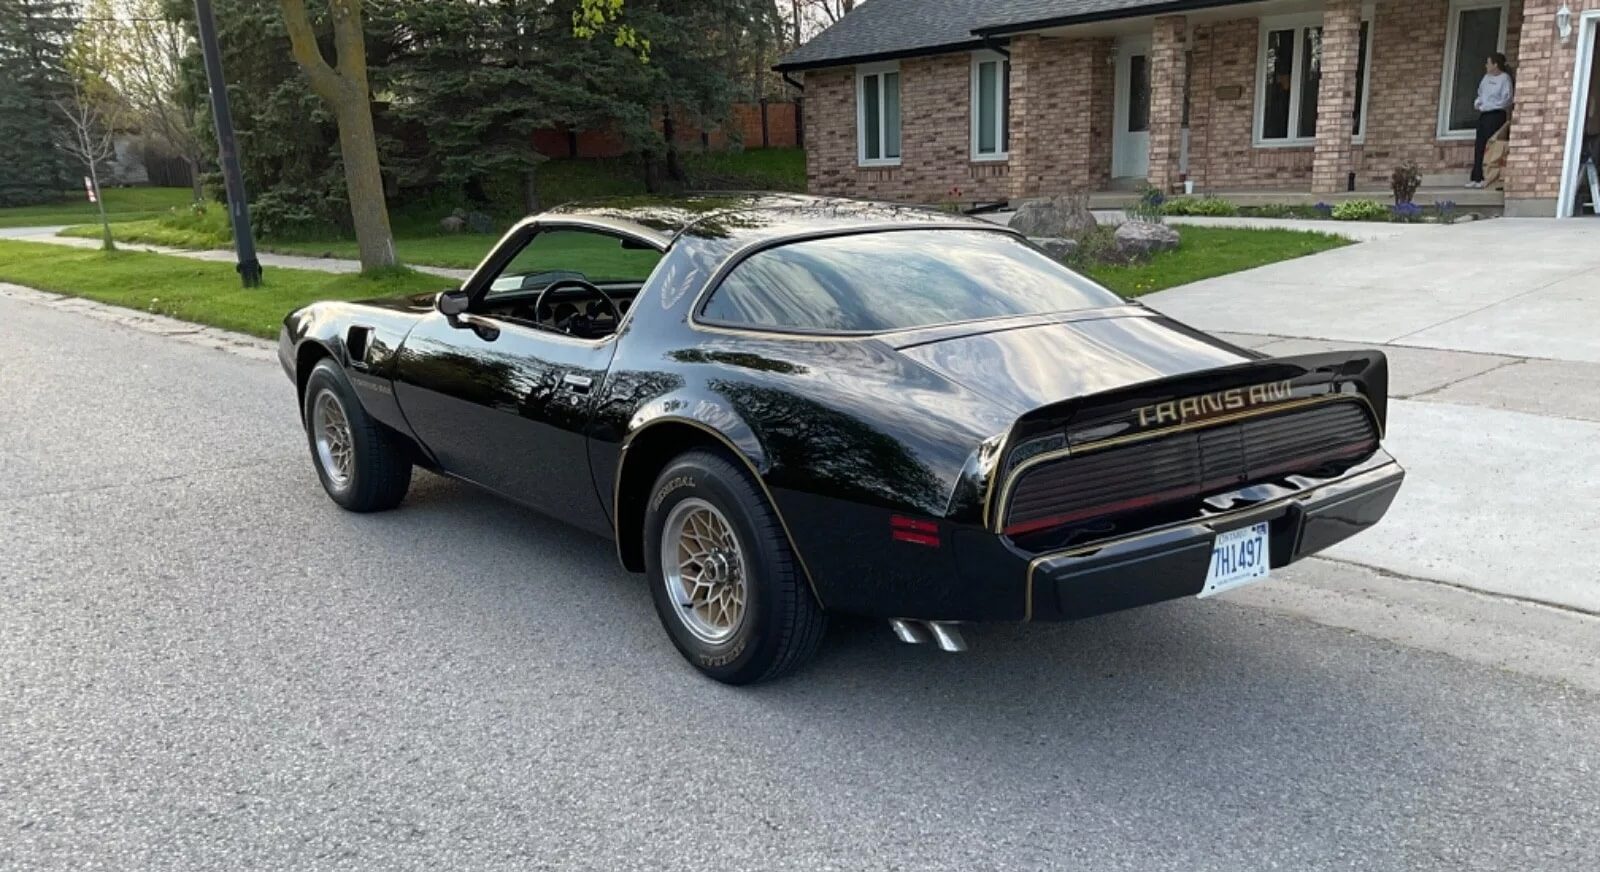 1980 Trans Am Special Edition Rarity